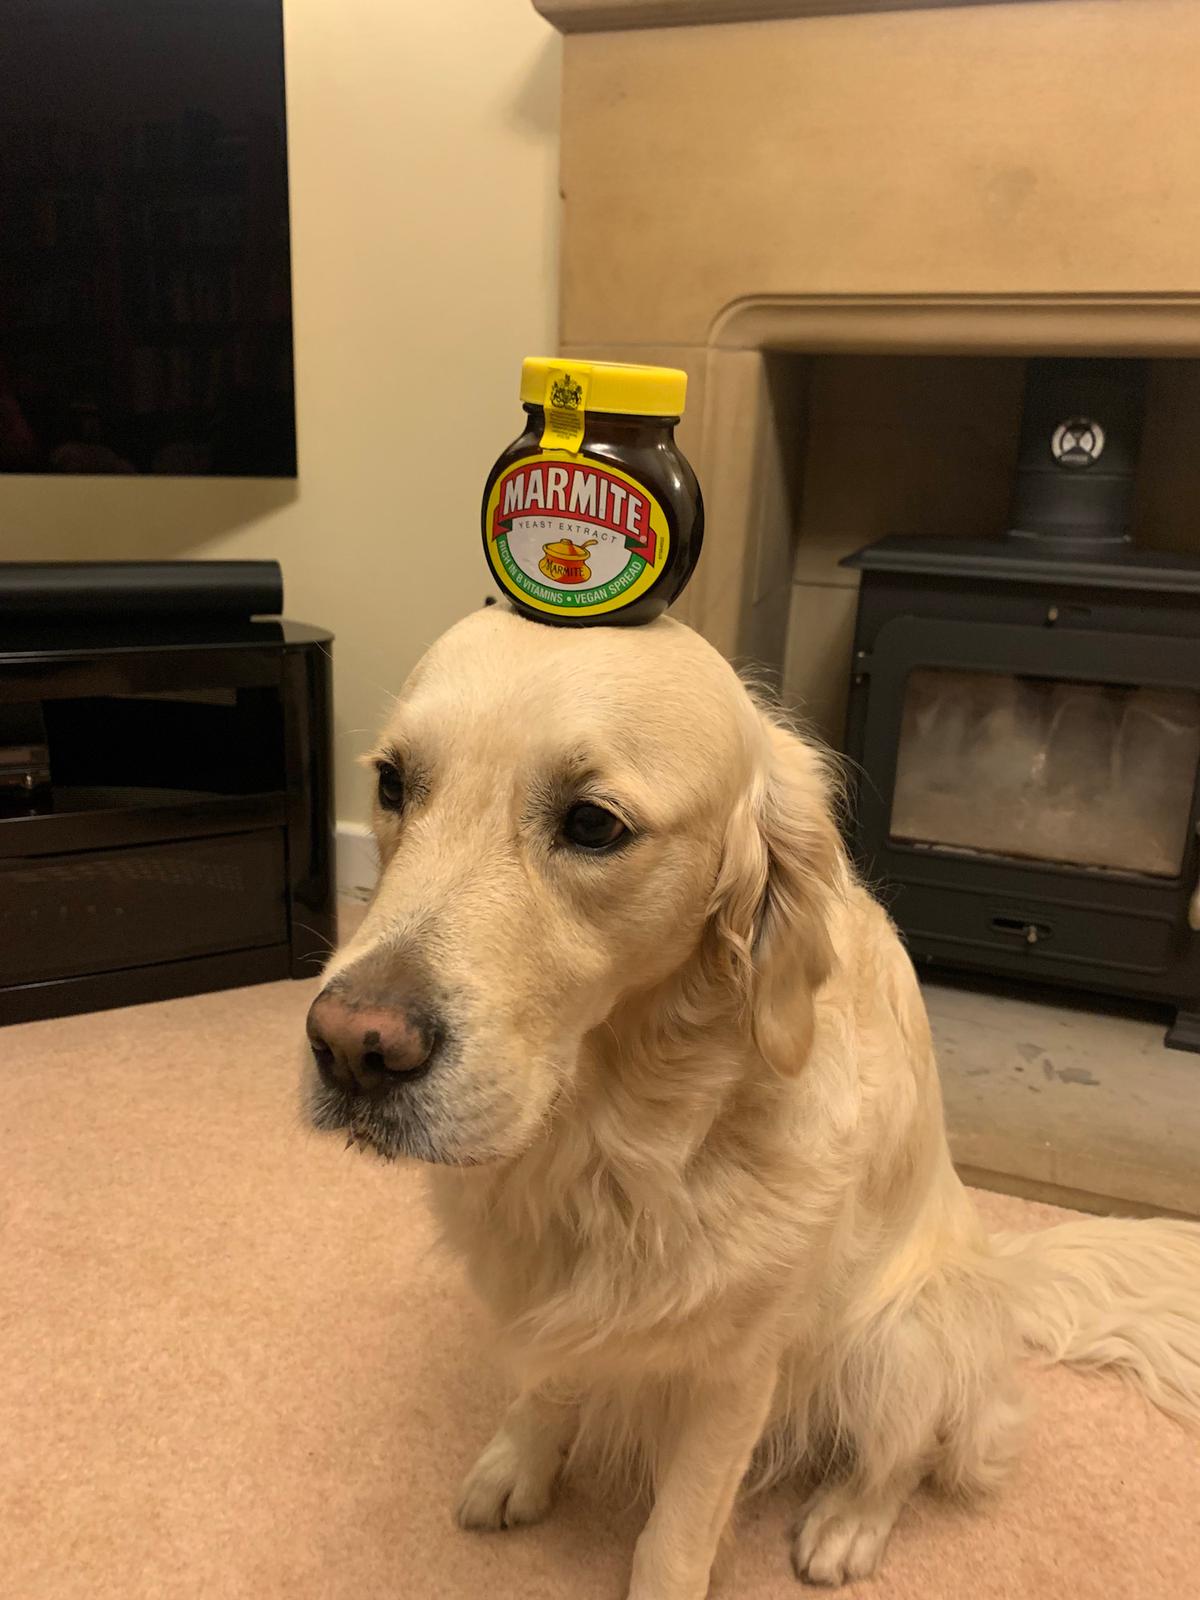 Dexter balanced a jar of Marmite on his head. (Courtesy of Caters News)